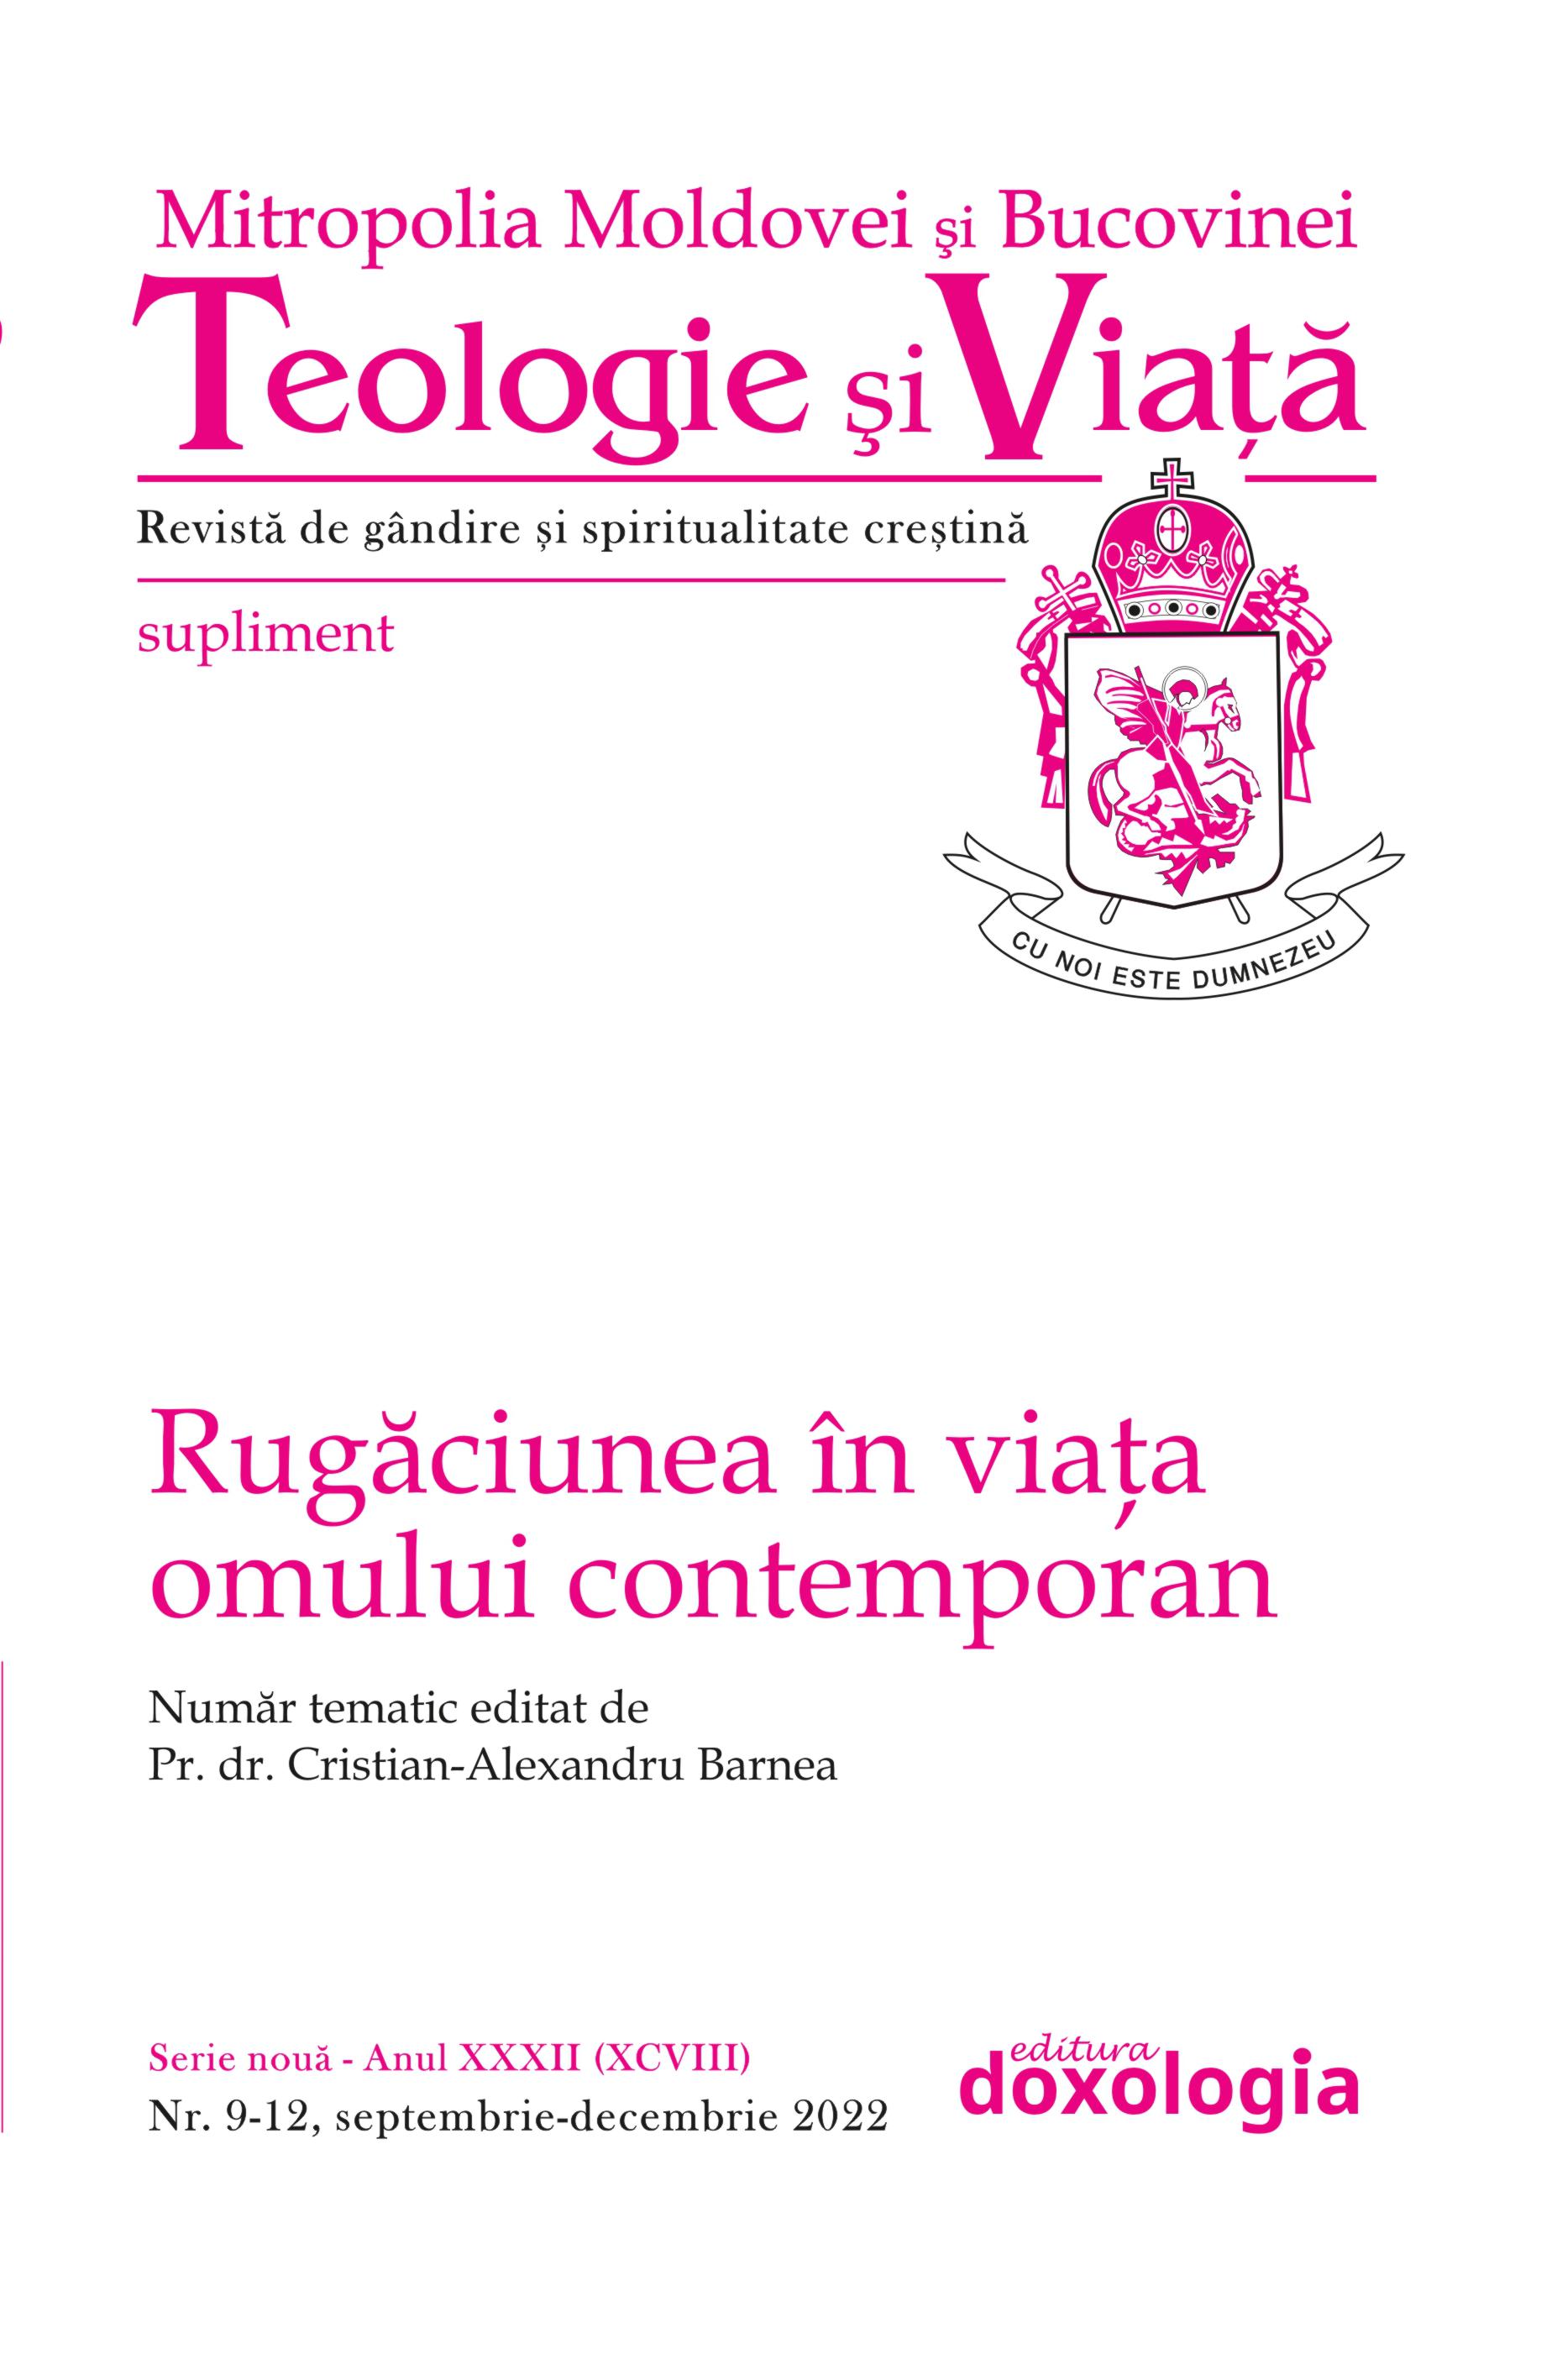 „Fove Precantes, Trinitas!” The Beneficent Influence of Saint Monica through Unceasing Prayers and Words of the Spirit, in the Dialogues of Cassiciacum Cover Image